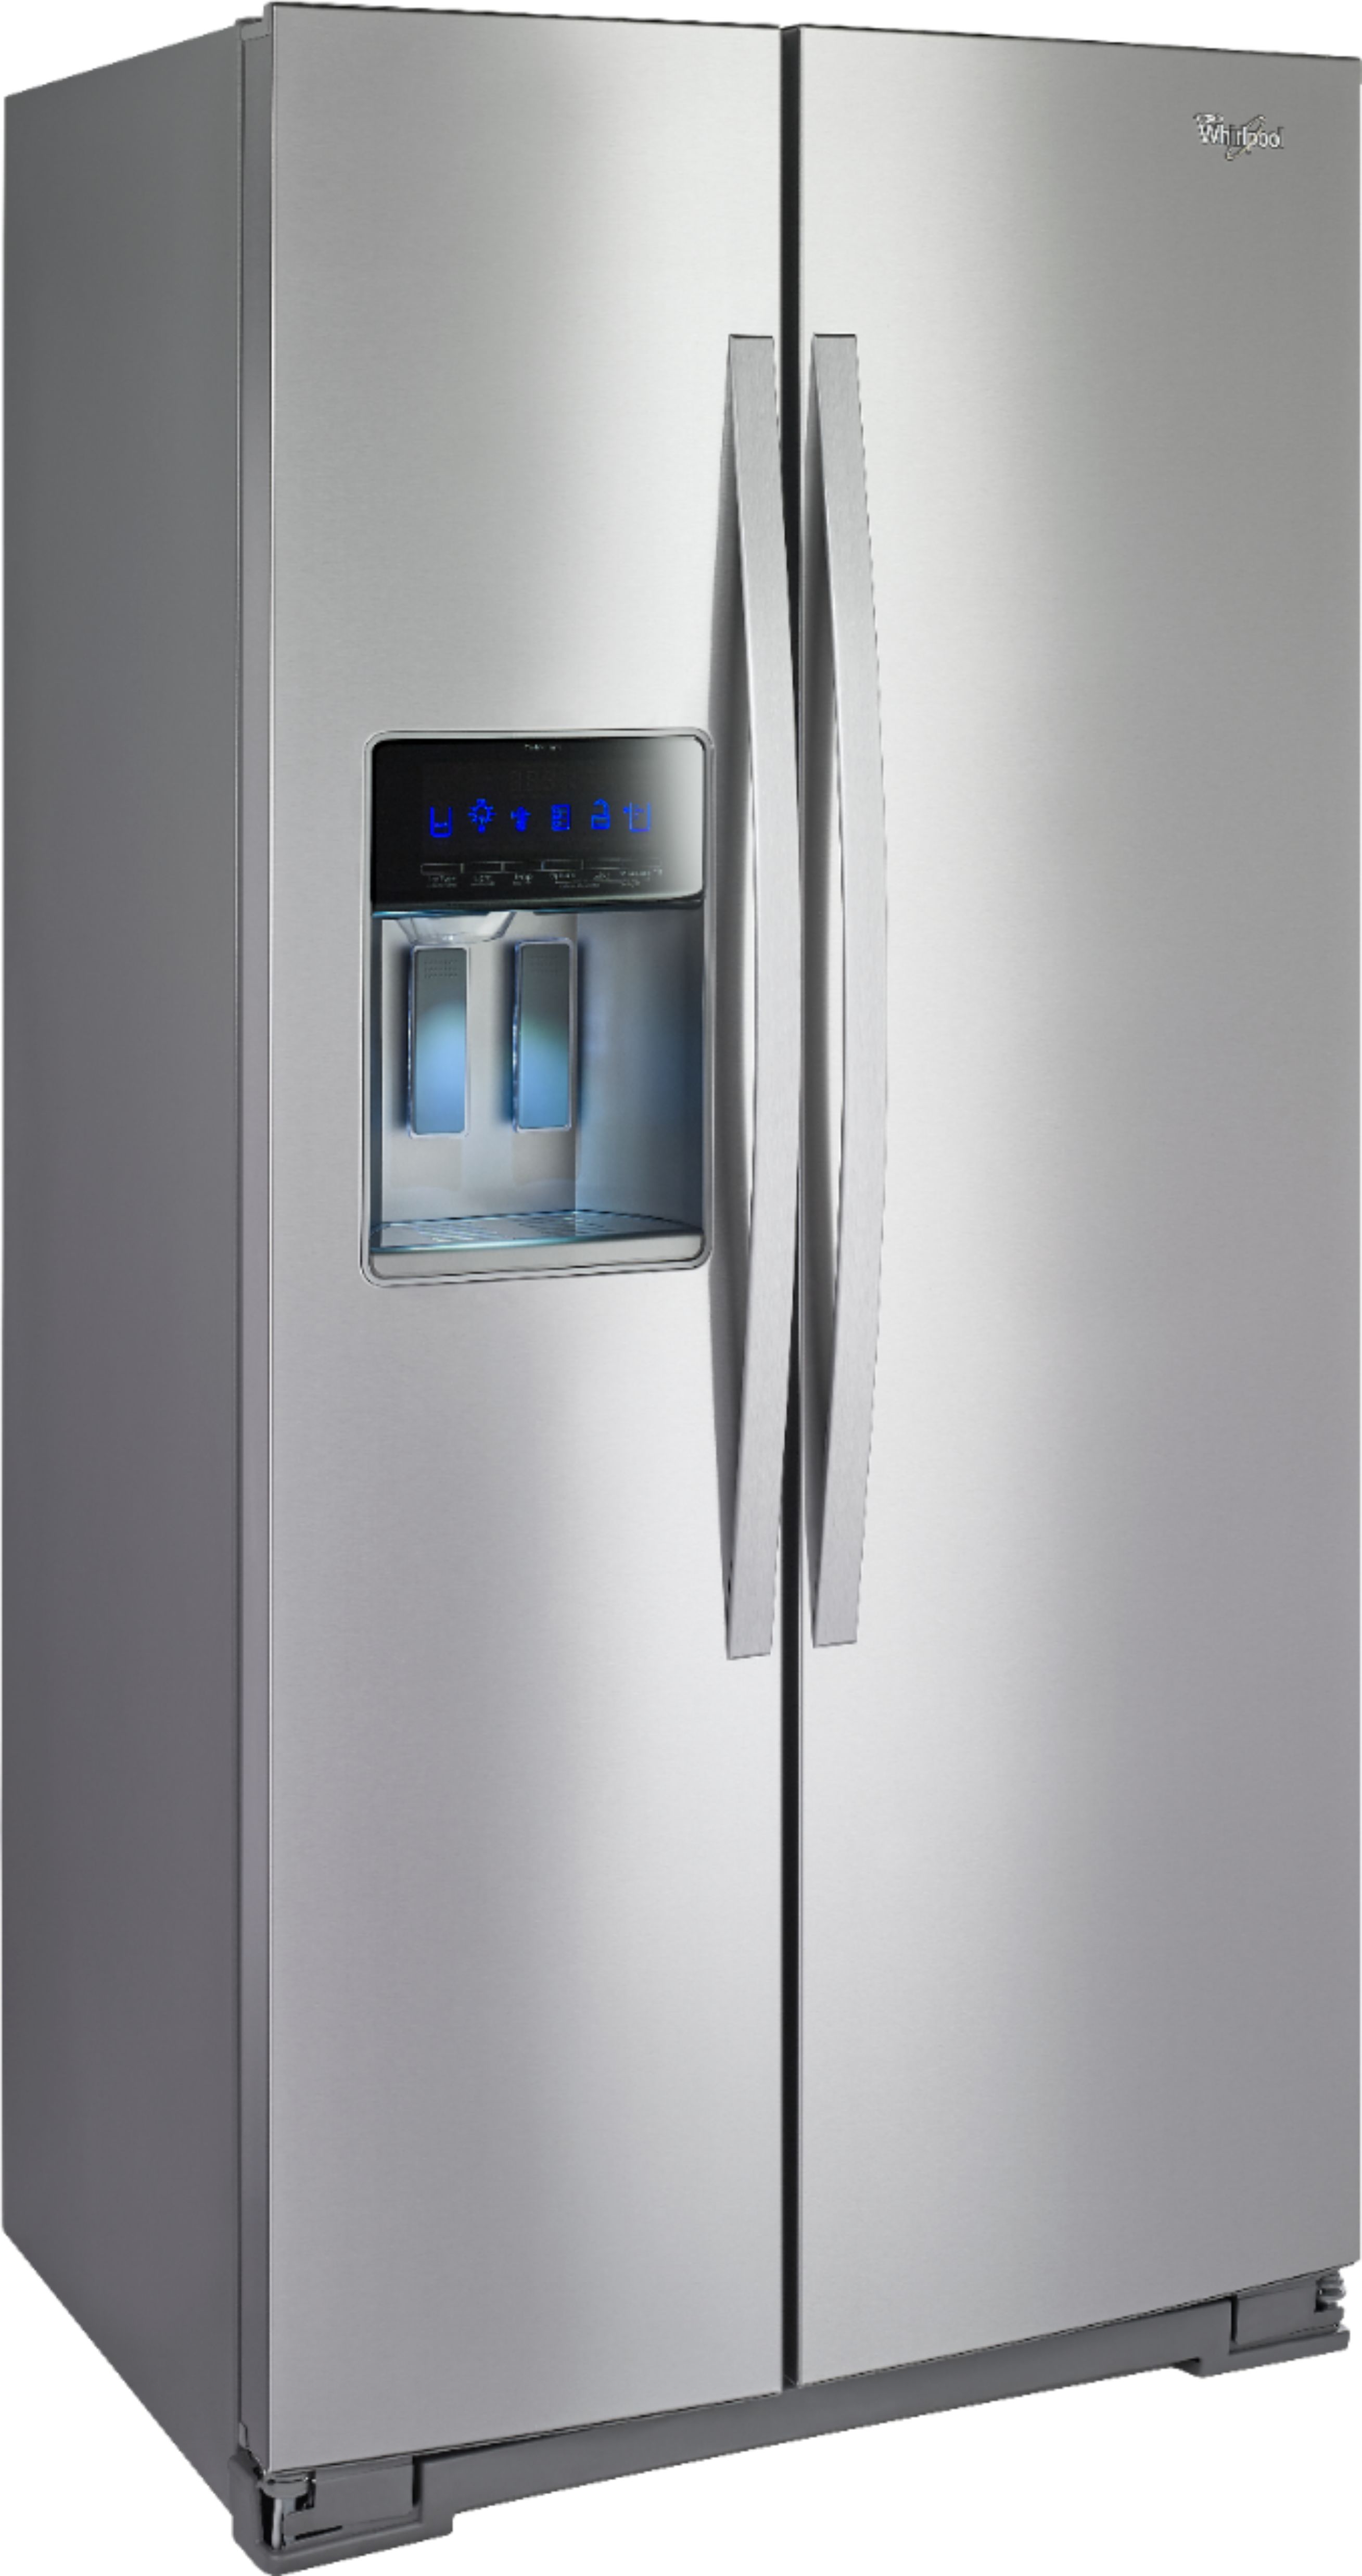 Angle View: Whirlpool - 19.9 Cu. Ft. Side-by-Side Counter-Depth Refrigerator - Monochromatic Stainless Steel